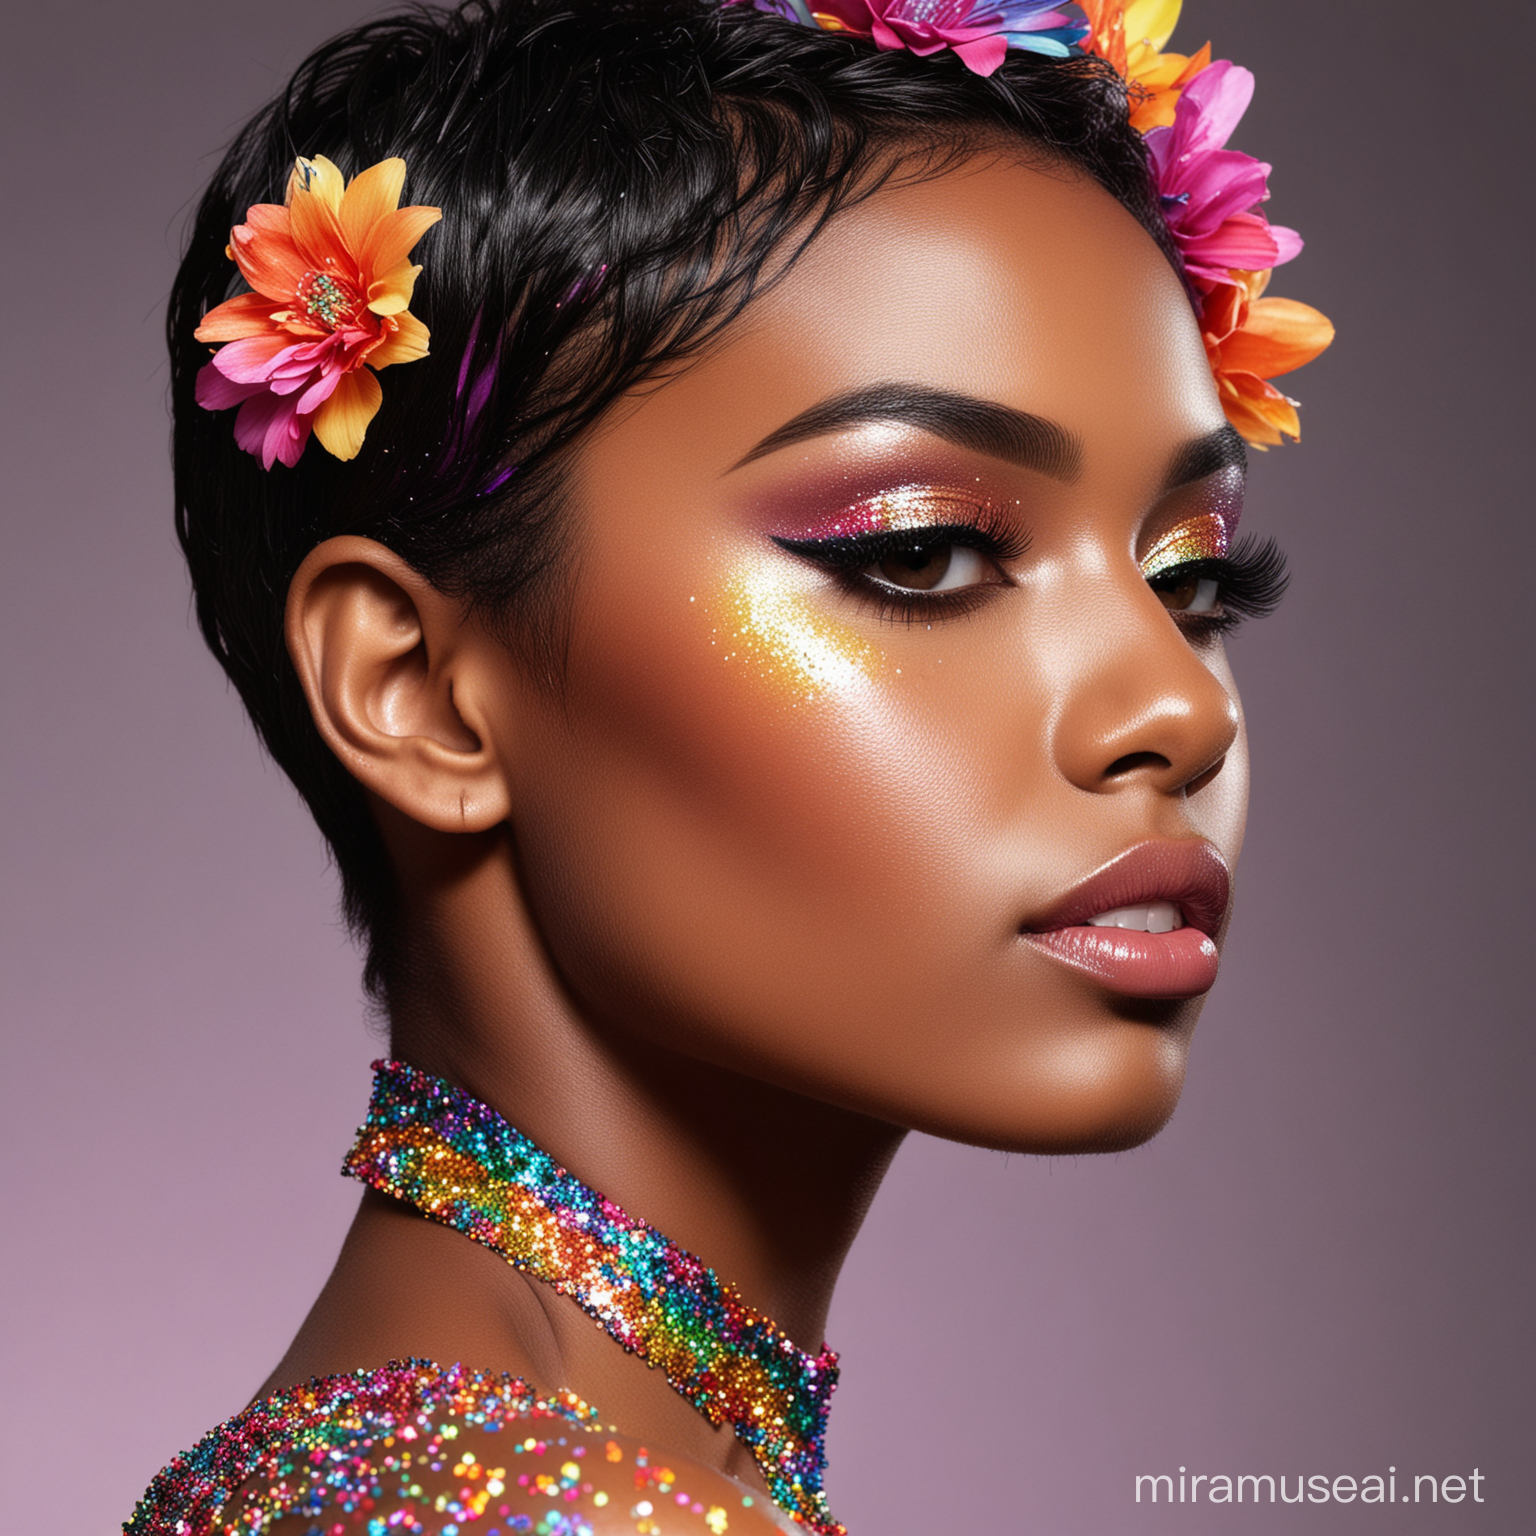 CloseUp Beauty Portrait of Black Model with Rainbow Glitter and Colorful Flowers